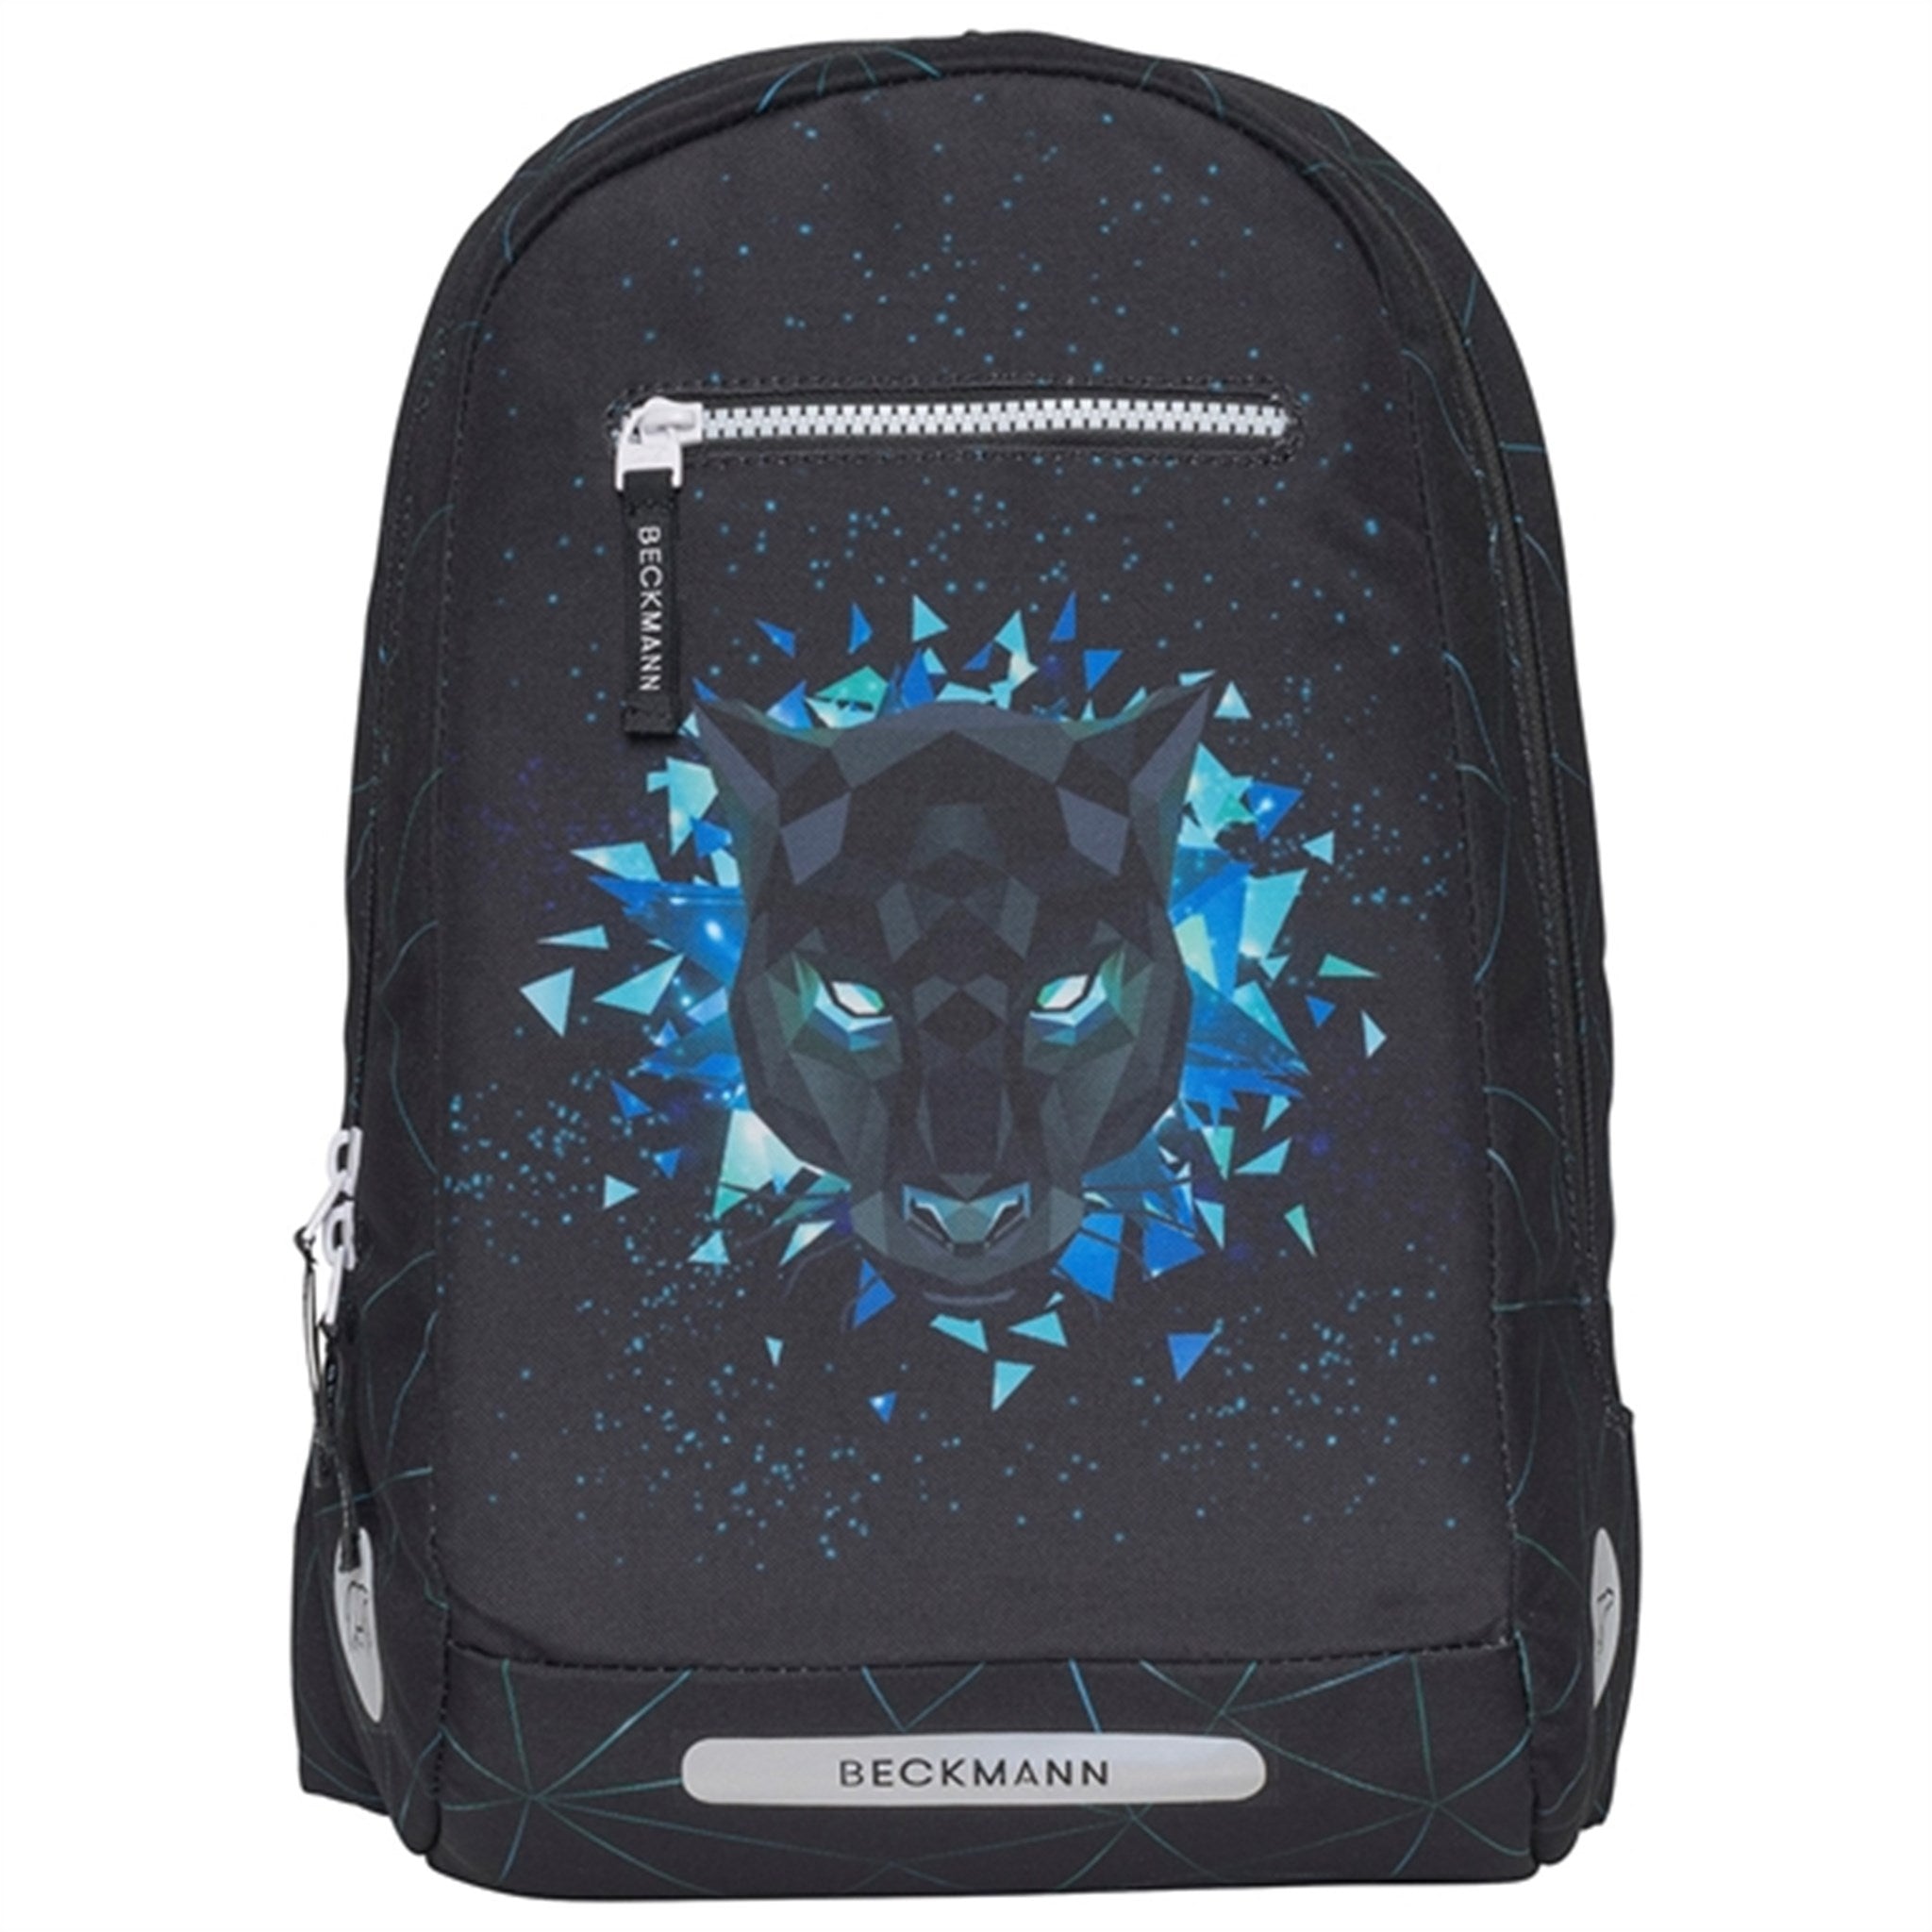 Beckmann Gym/Hiking Backpack Panther